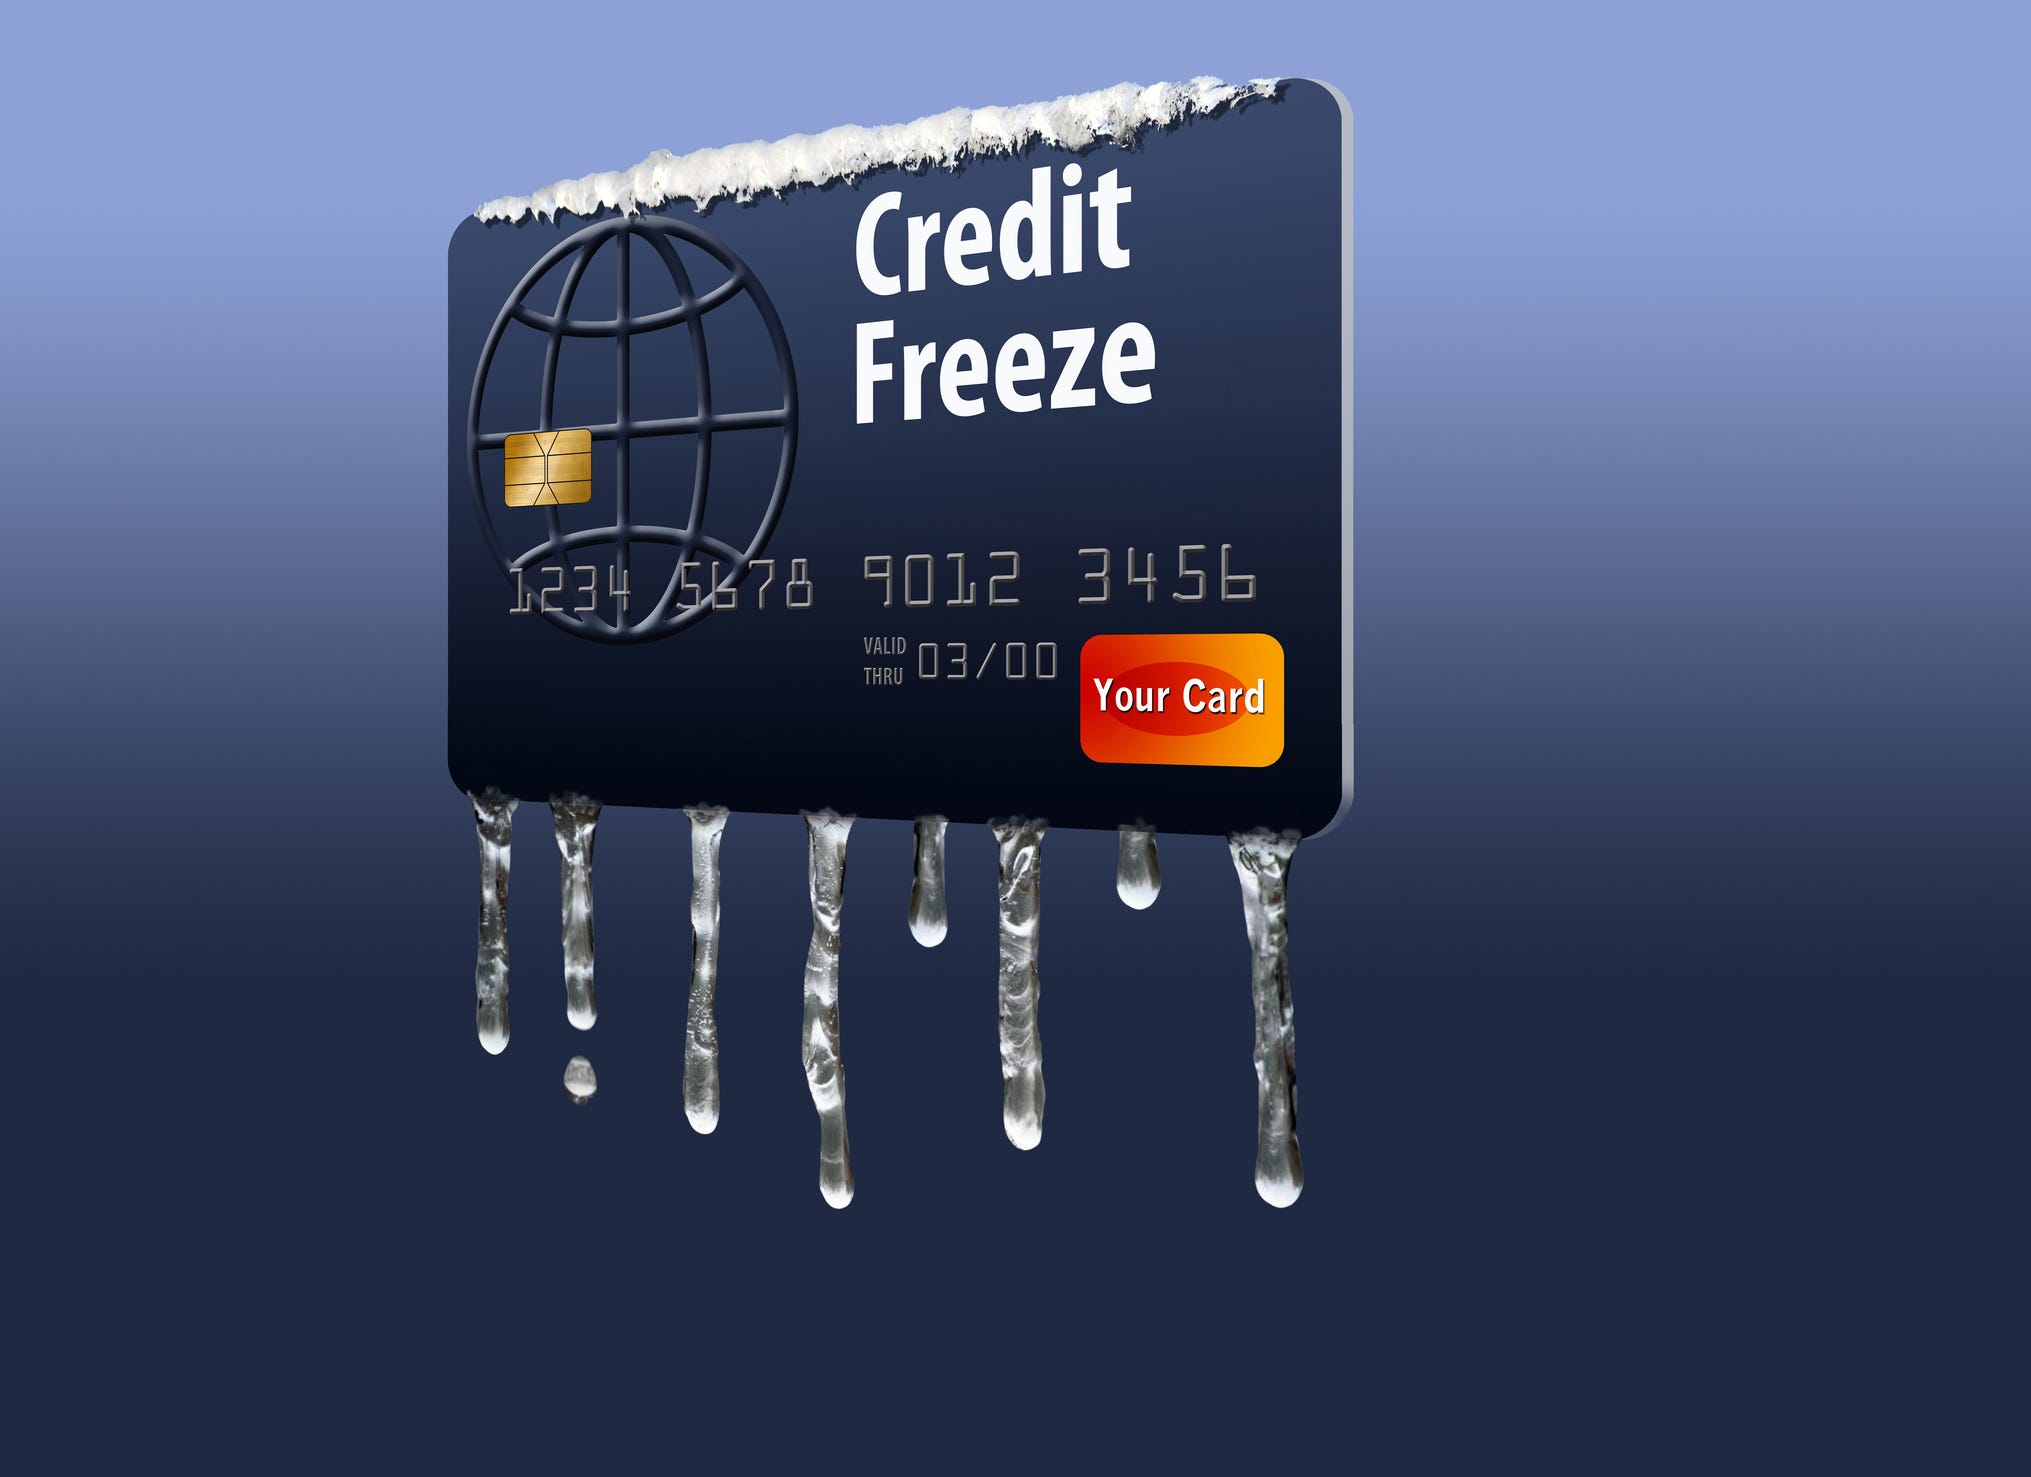 equifax lift freeze by phone